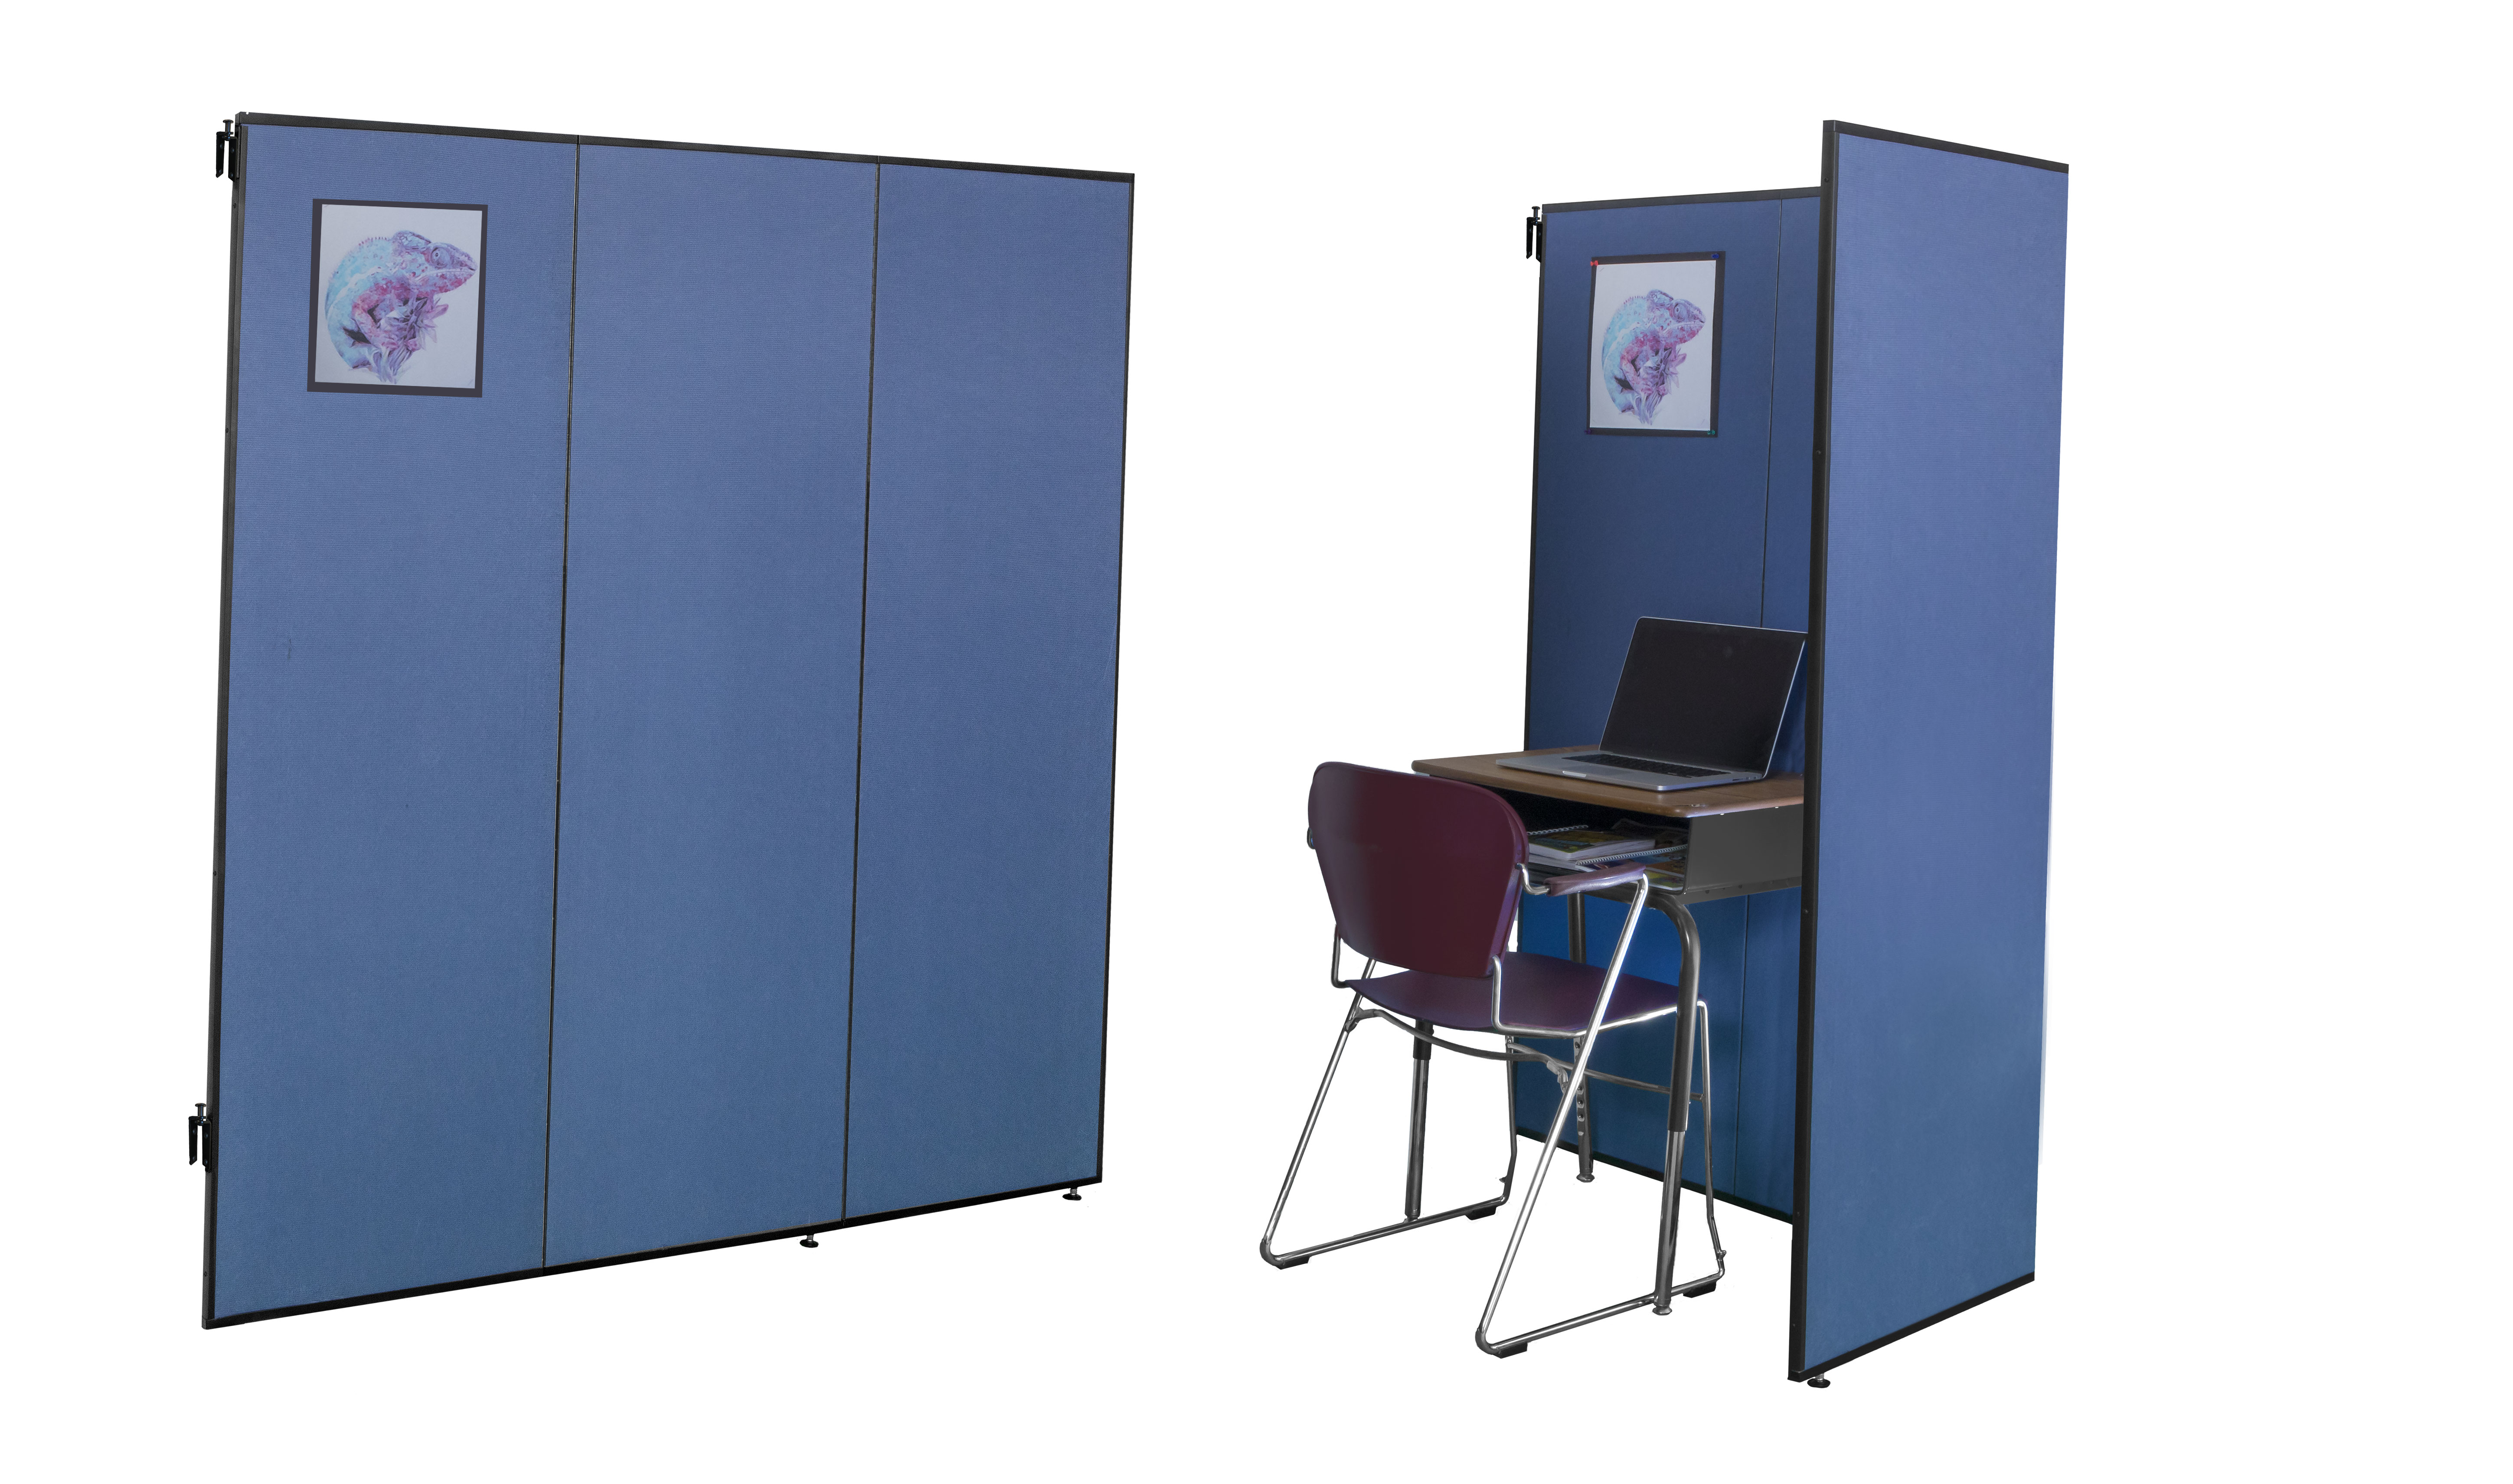 Two and three panel study carrels provide privacy and display surfaces